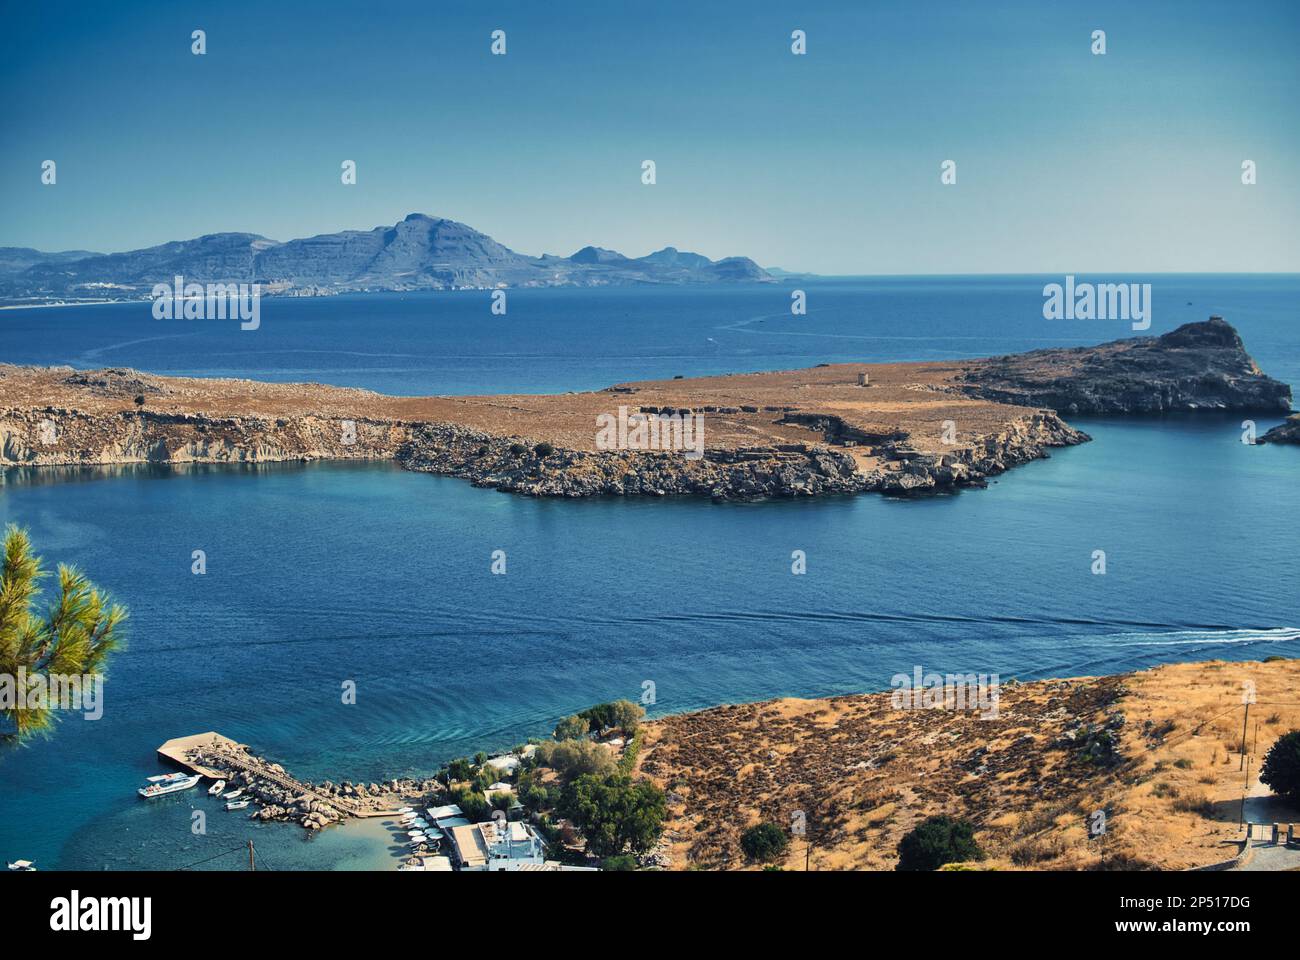 Landscape of a bay of Lindos at Rhodes island in Greece during summer season Stock Photo